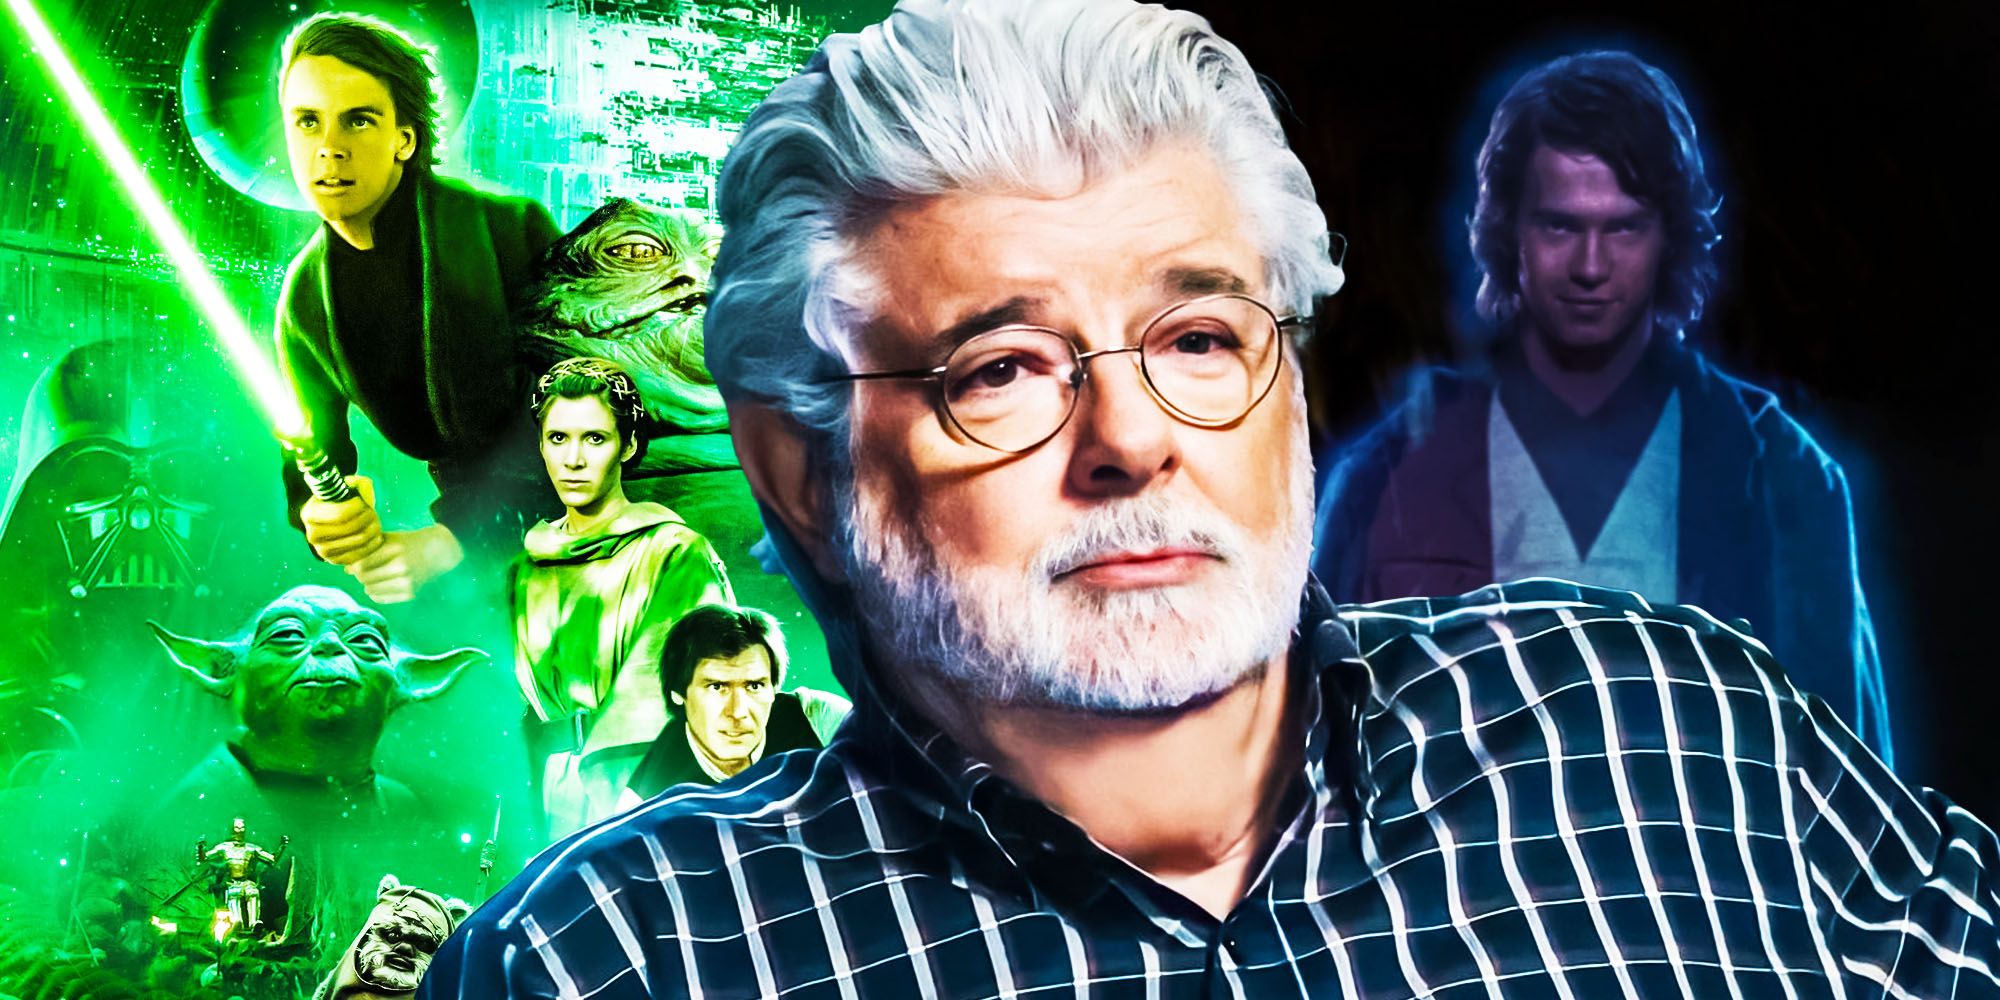 George Lucas with ensemble from Return of the Jedi plus Hayden Christensen force ghost montage